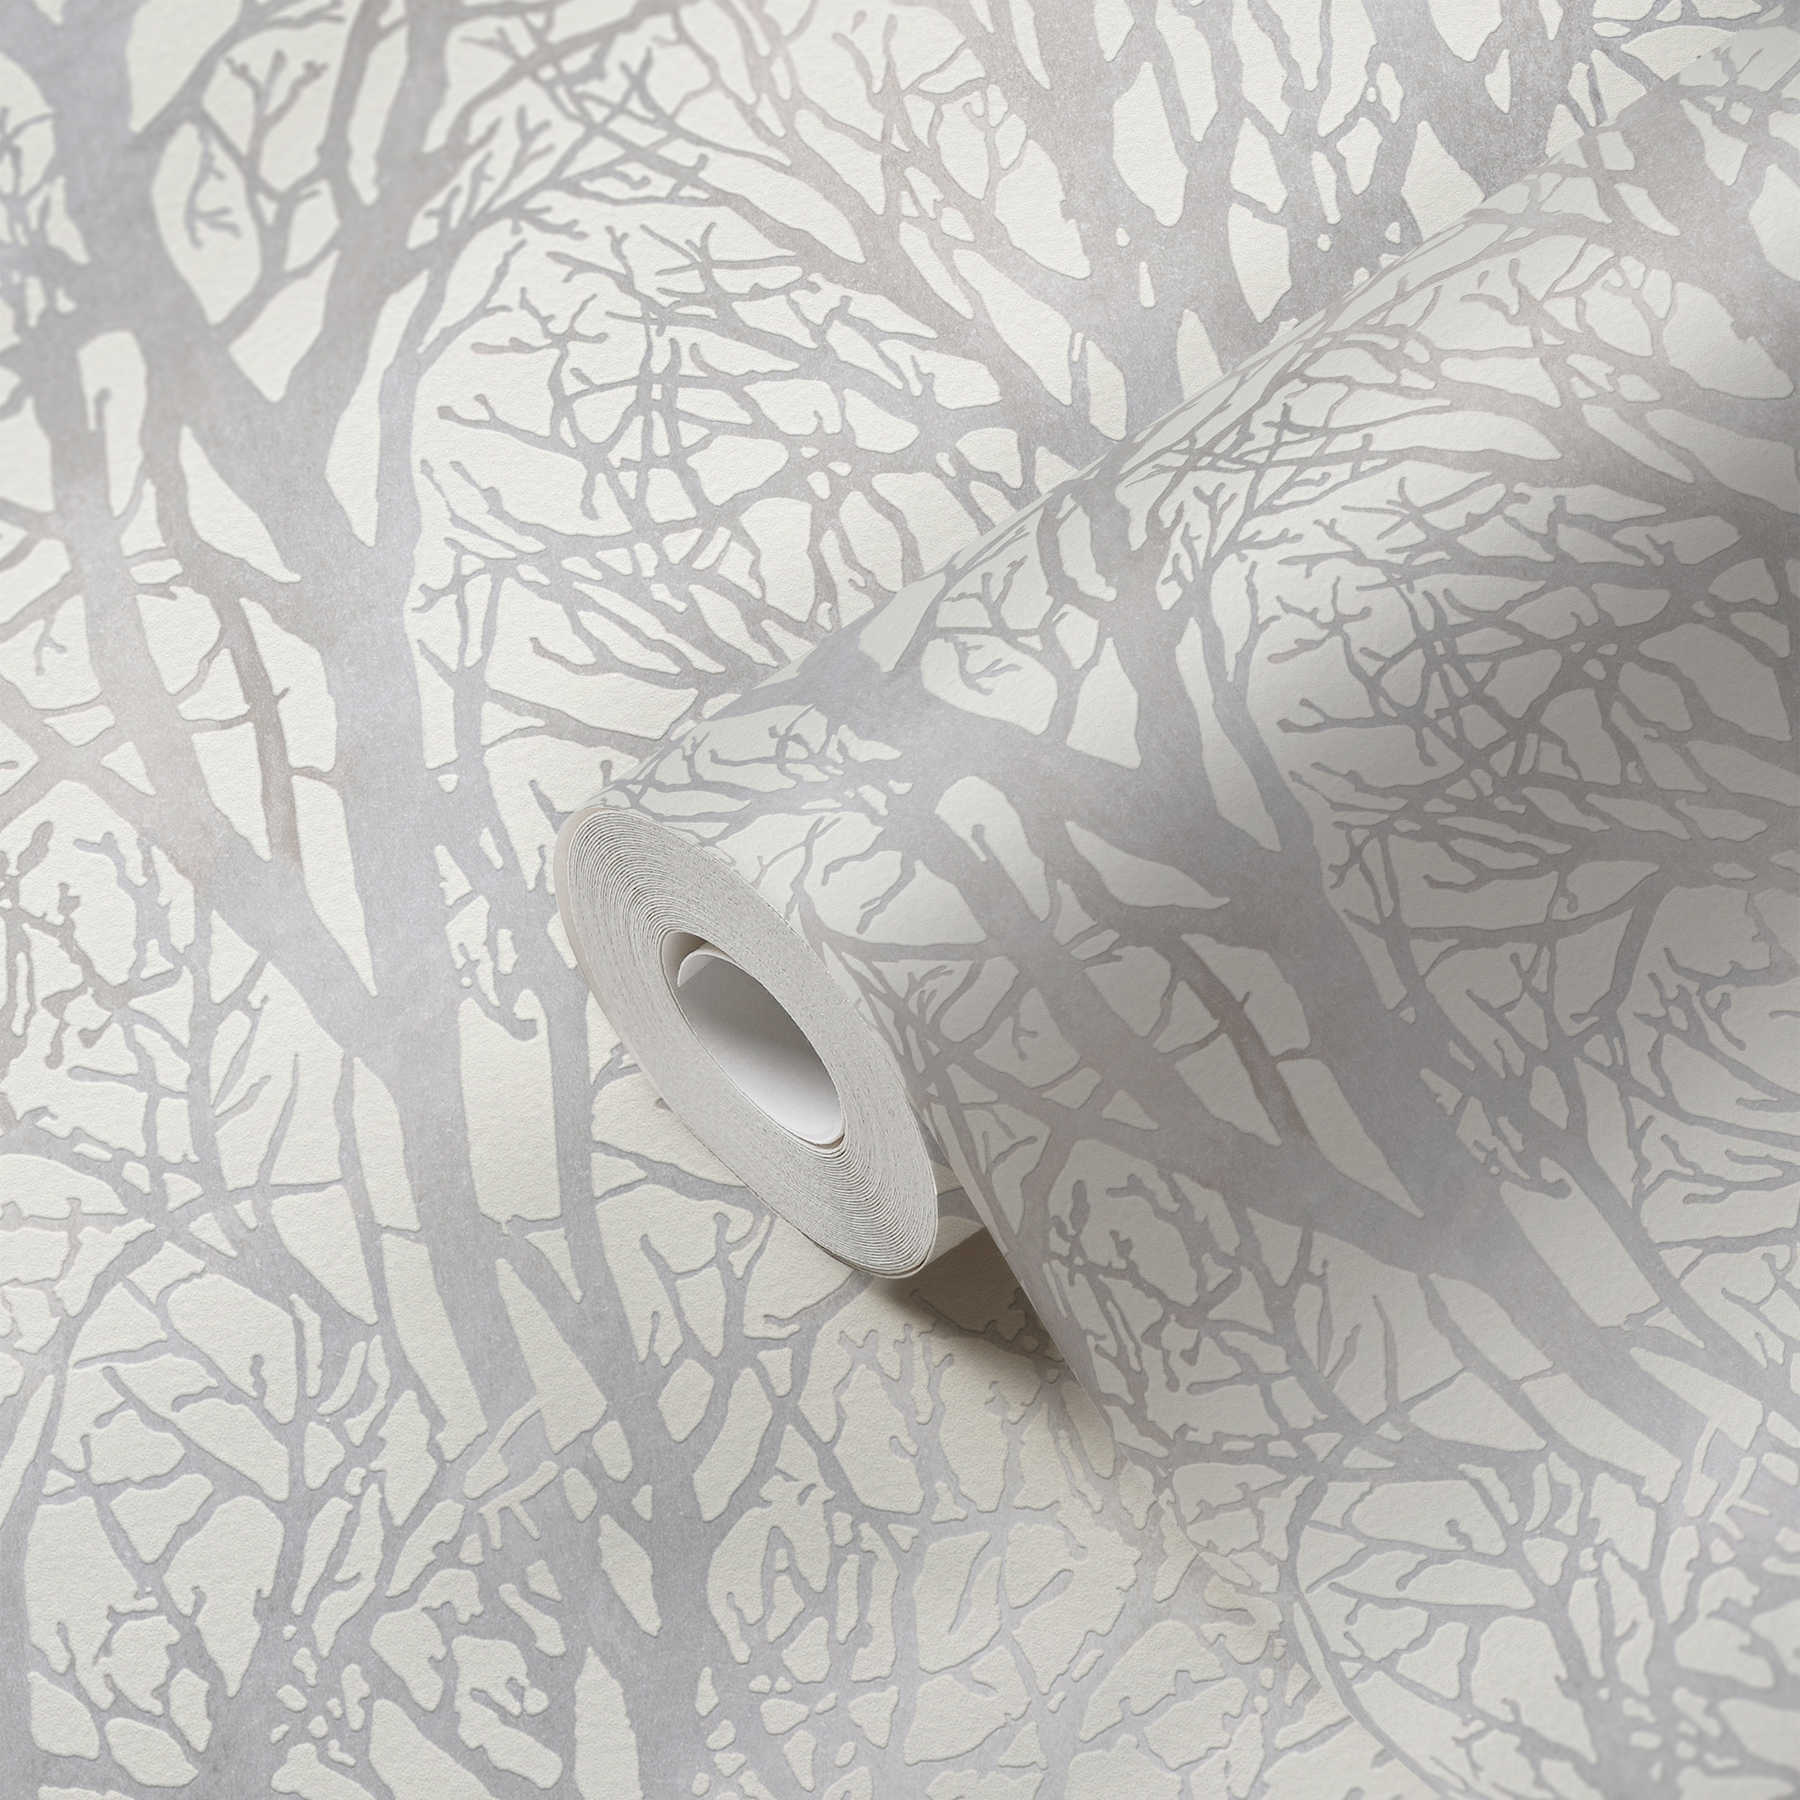             Silver grey wallpaper with branches motif and metallic effect - white, silver
        